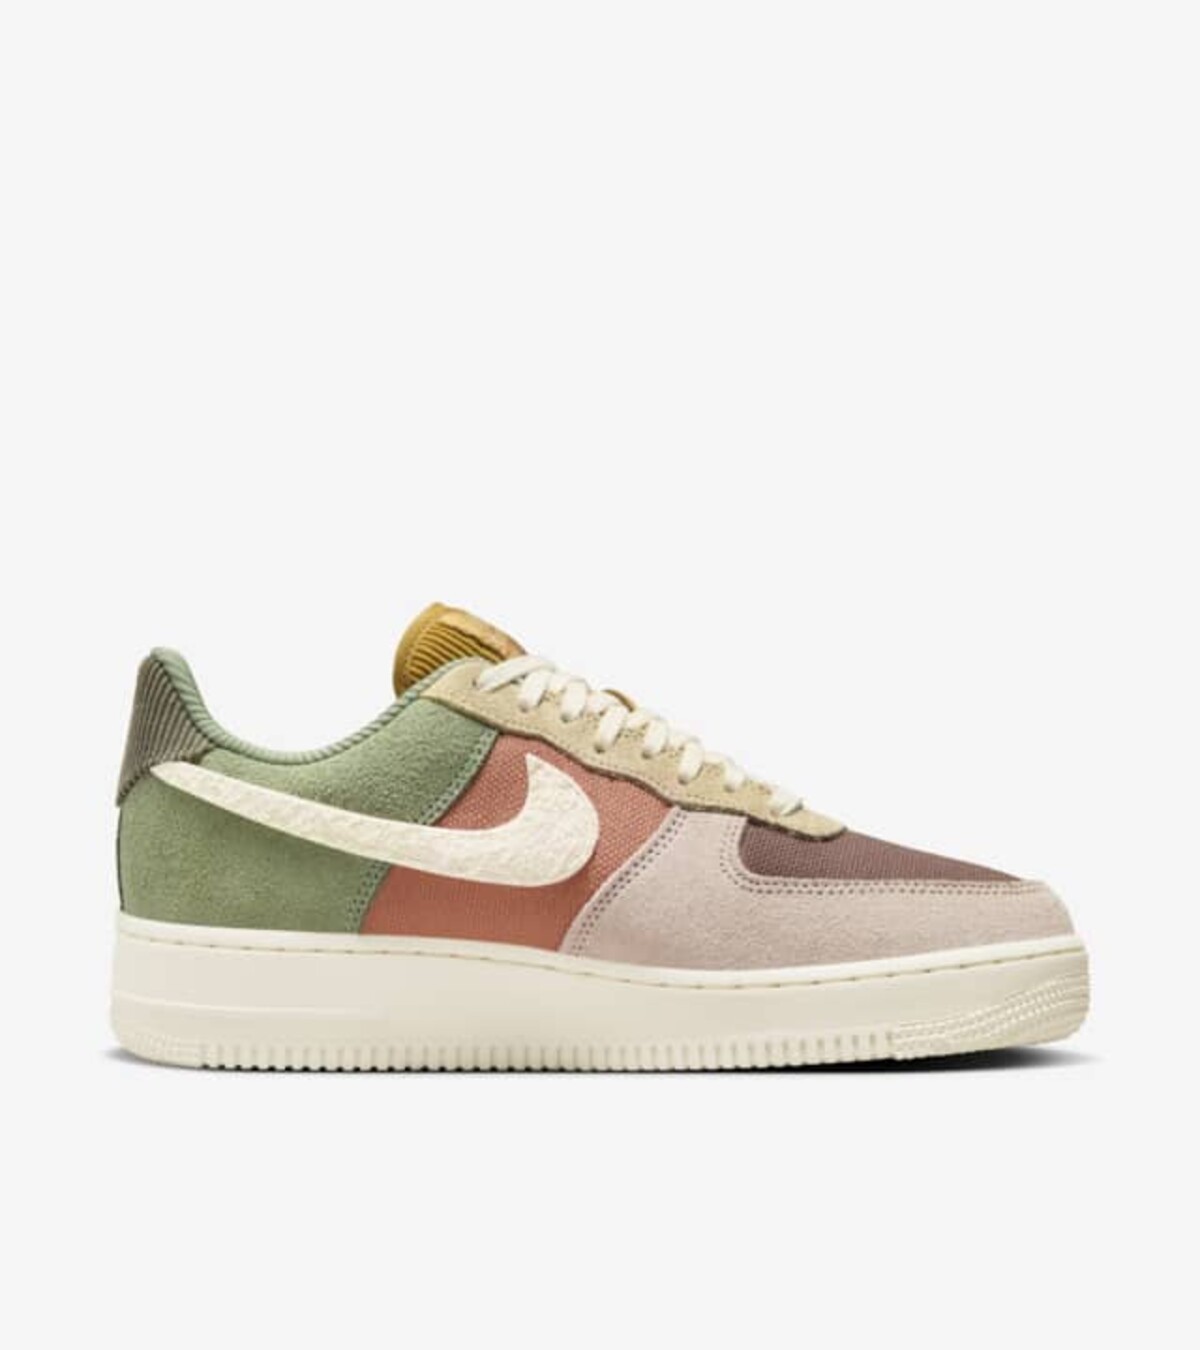 Nike Air Force 1 '07 Low W